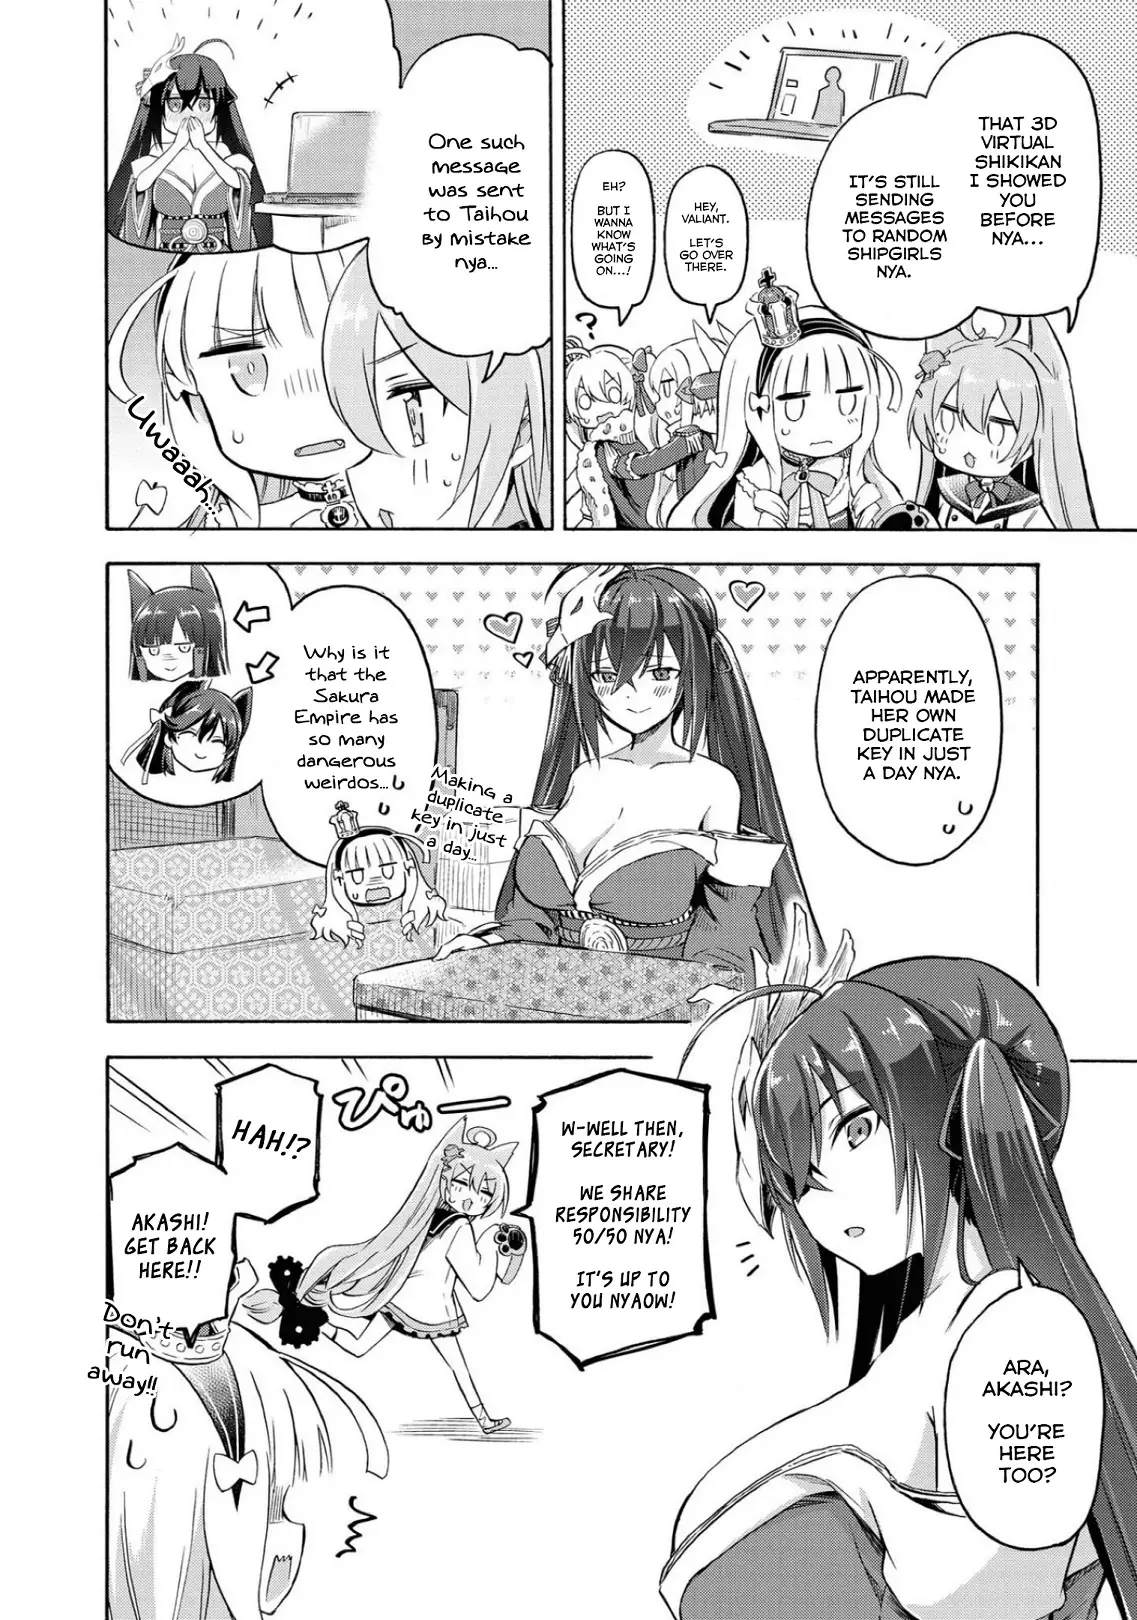 Azur Lane: Queen's Orders - 94 page 2-3f39e4cd